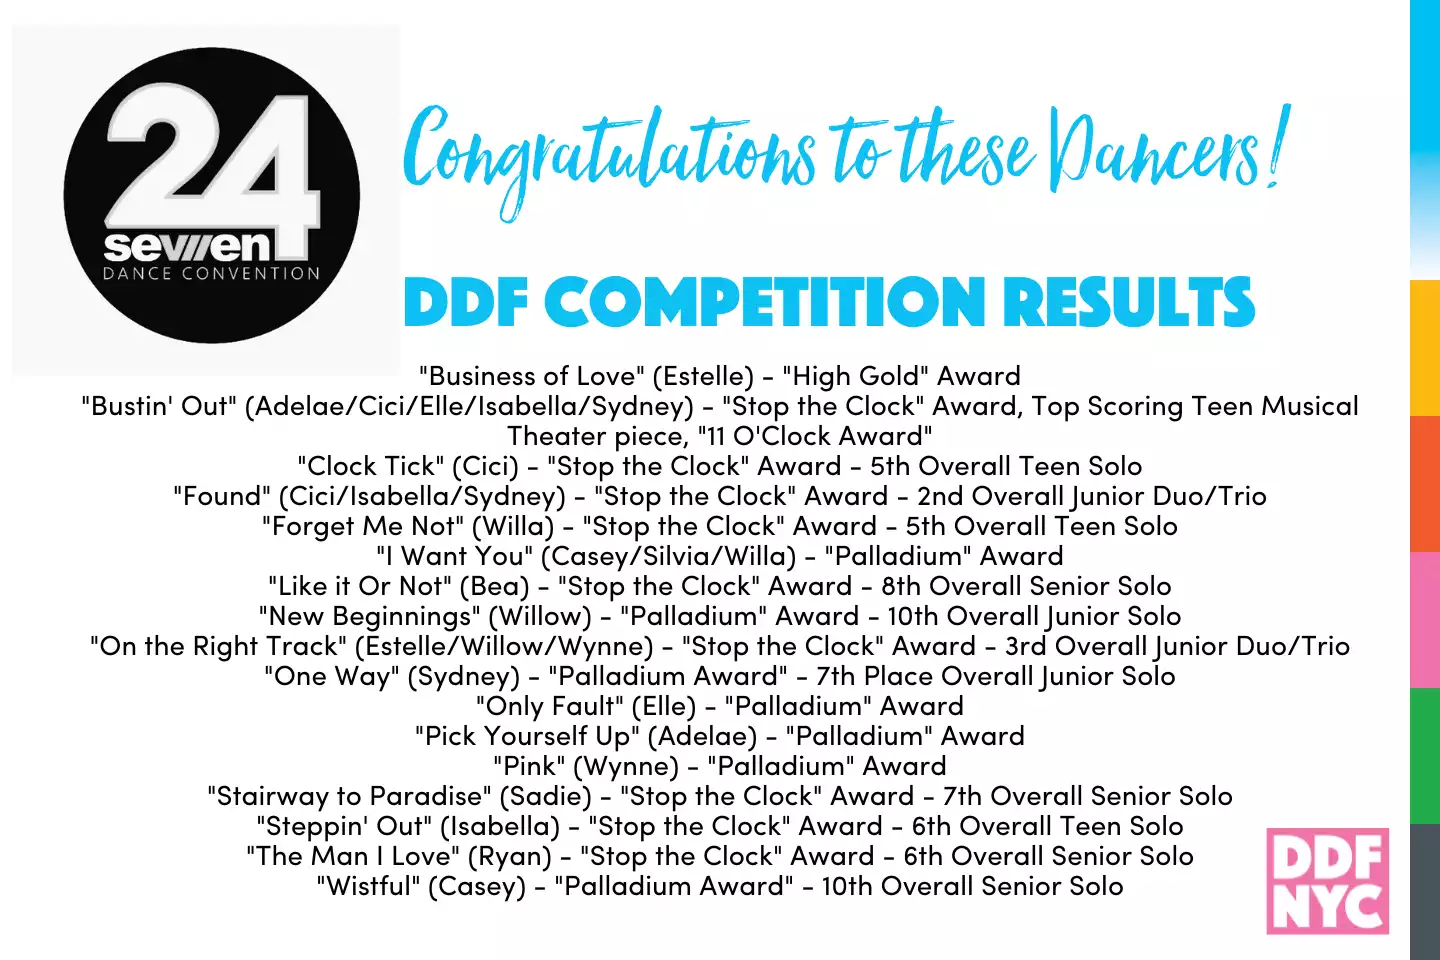 Congrats to our 24/7 Convention & Competition Dancers!